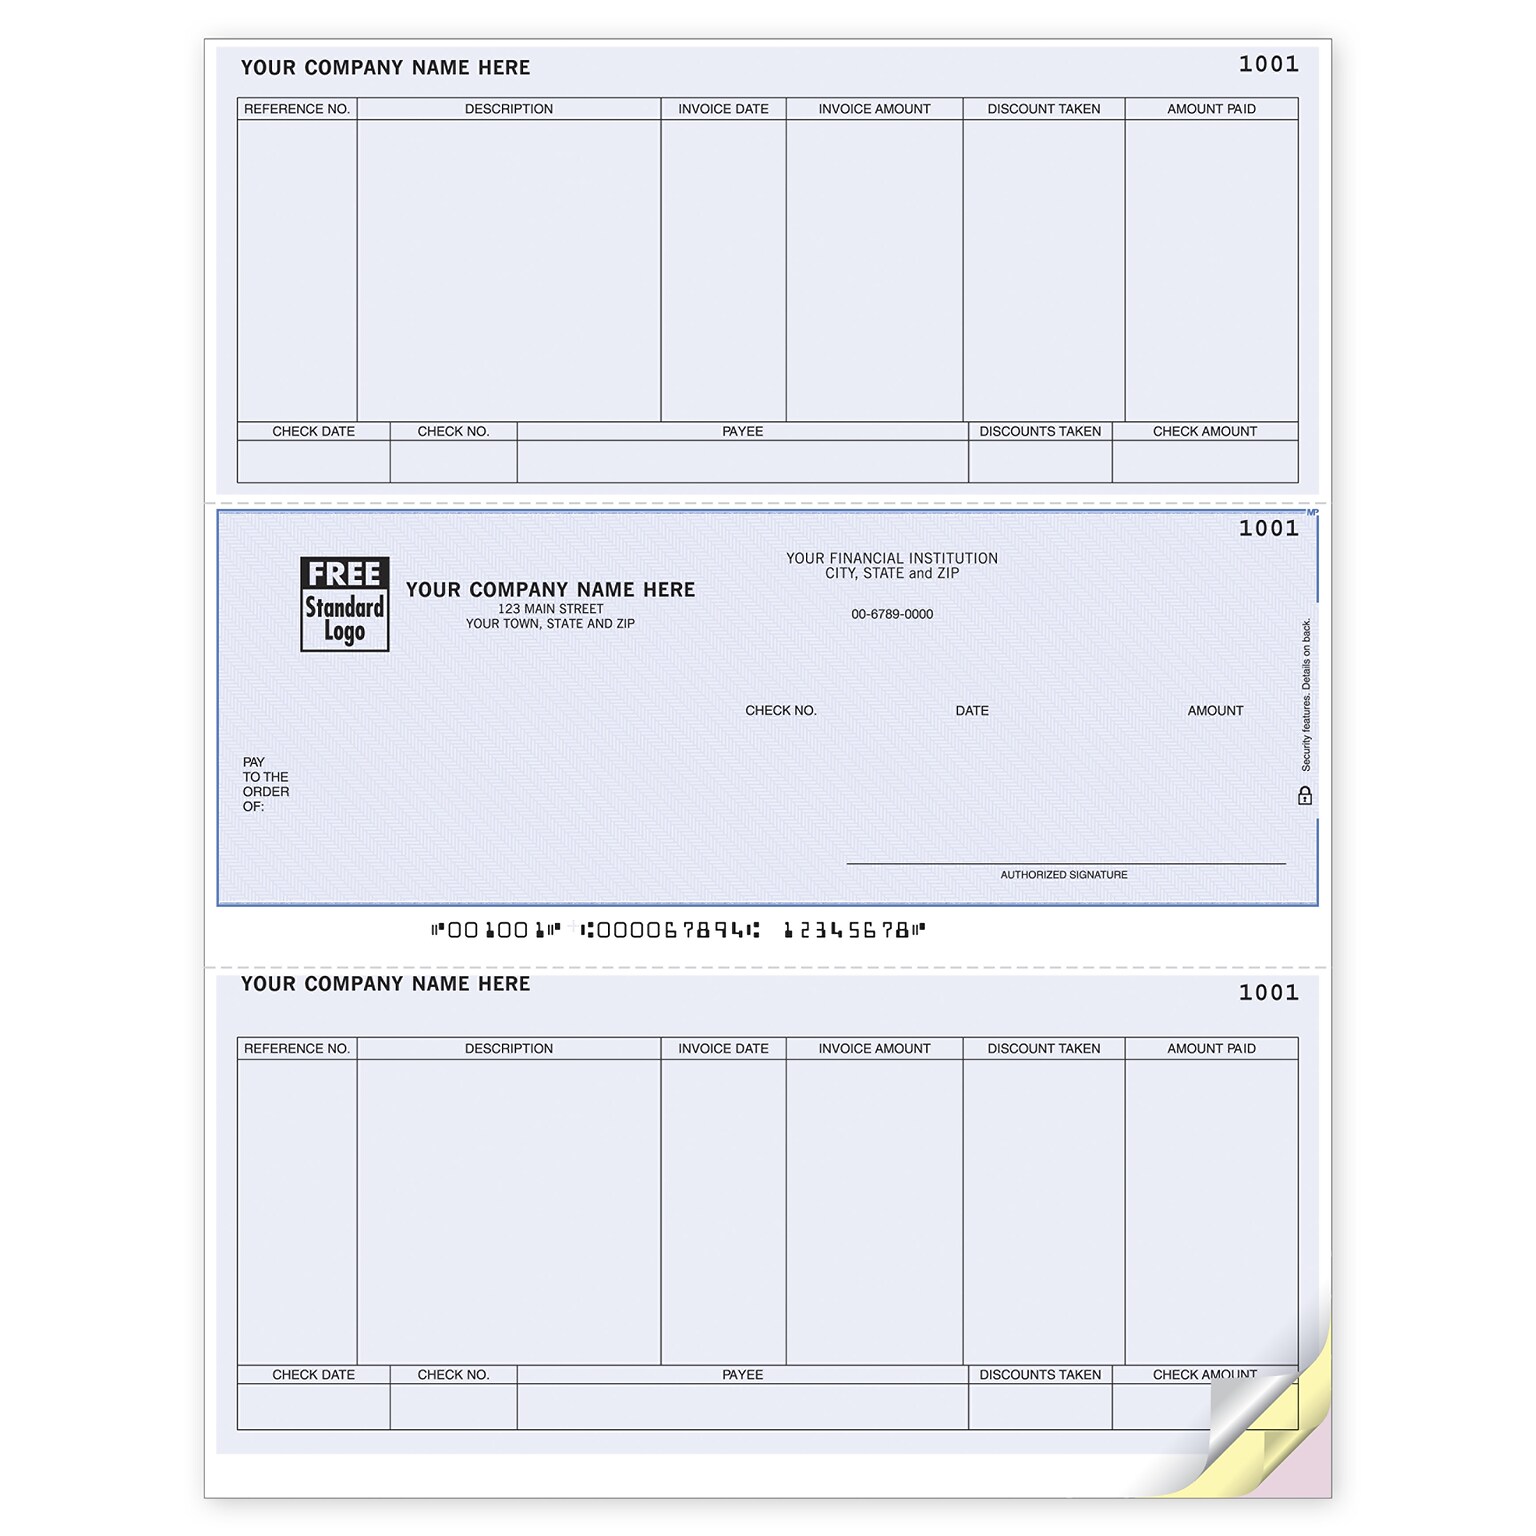 Custom Laser Middle Check, Accounts Payable, 3 Ply/Triplicate, 2 Color Printing, Standard Check Color, 8-1/2 x 11, 500/Pk